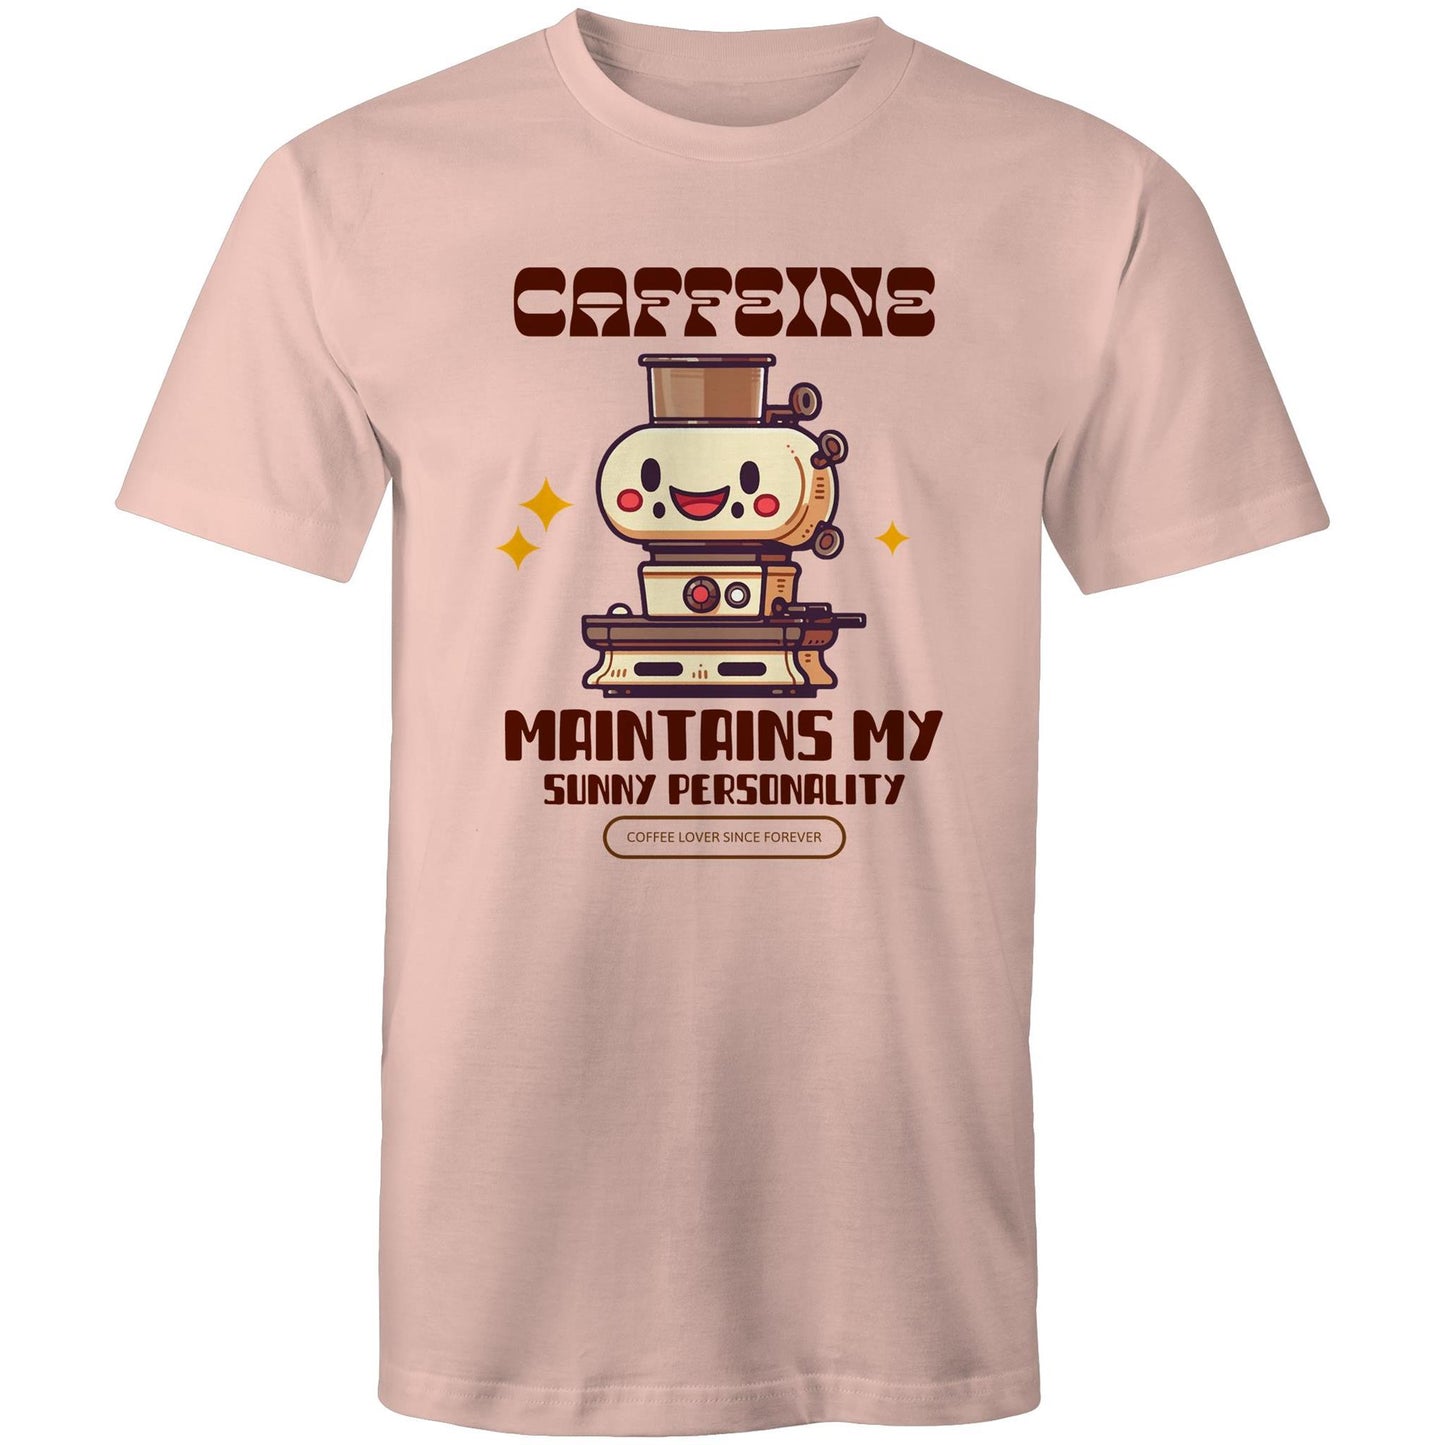 Caffeine Maintains My Sunny Personality - Mens T-Shirt Pale Pink Mens T-shirt Coffee